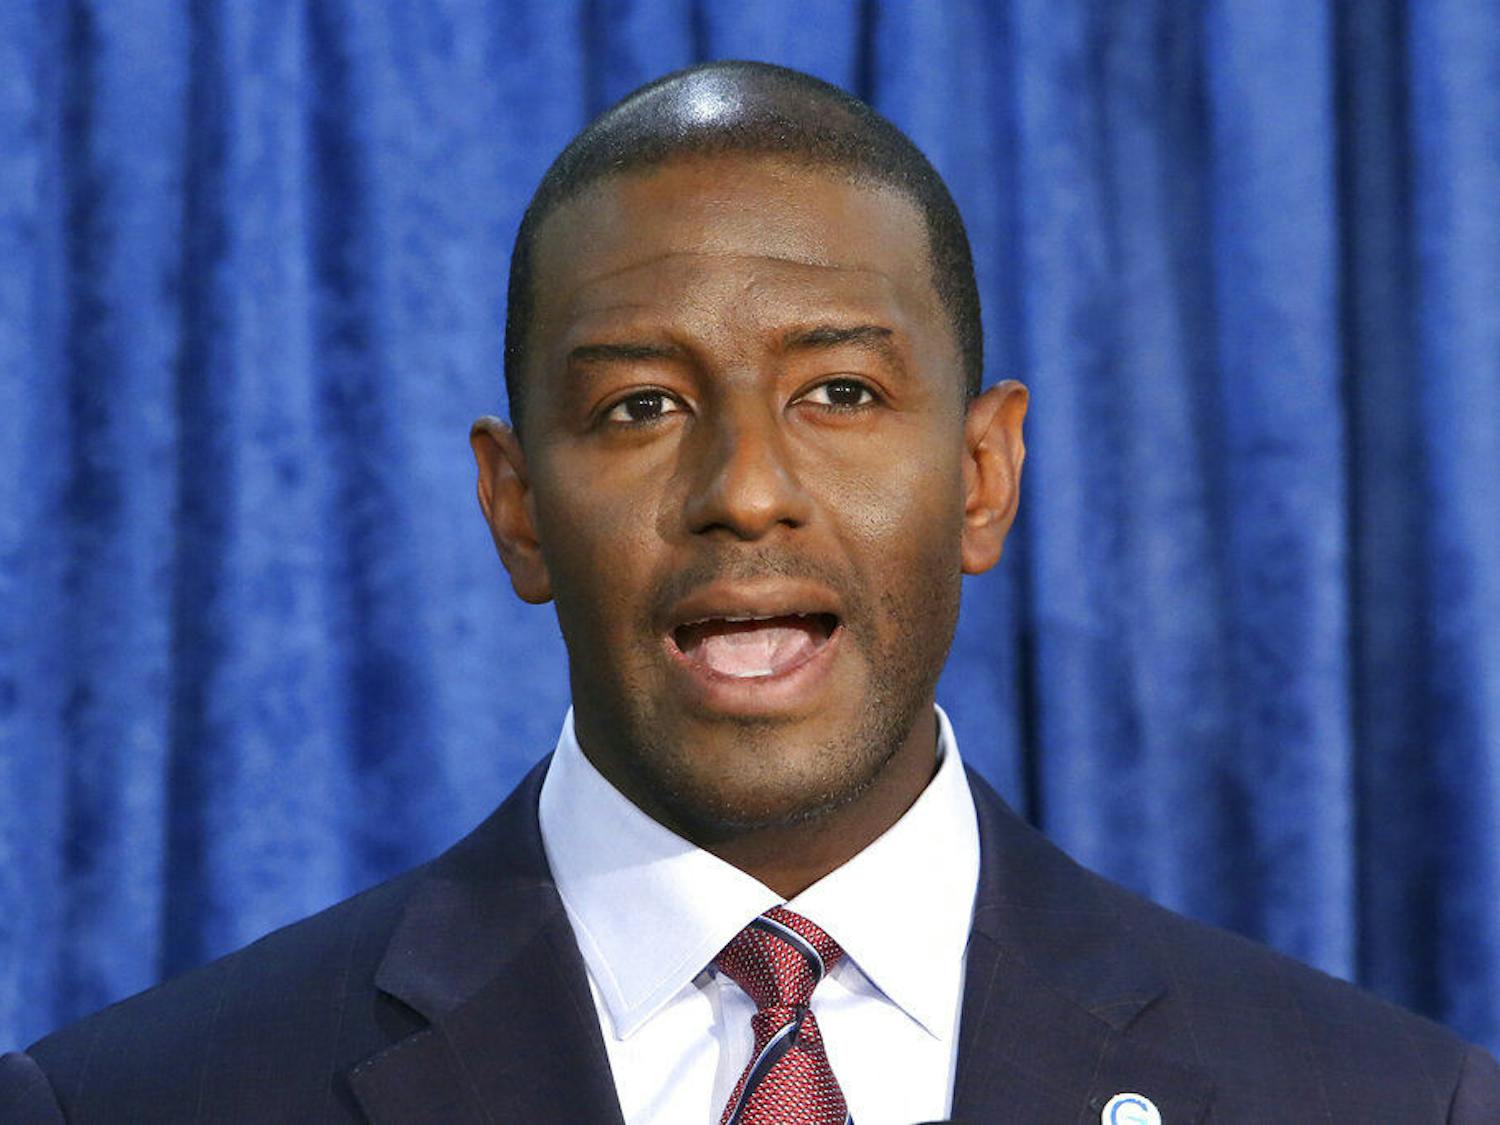 FILE - In this Nov. 10, 2018 file photo, Andrew Gillum the Democrat candidate for governor speaks at a news conference in Tallahassee, Fla. Gillum is named in a police report Friday, March 13, 2020 saying he was “inebriated" and initially unresponsive in a hotel room where authorities found baggies of suspected crystal methamphetamine. Gillum, the former Tallahassee mayor who ran for governor in 2018, is not charged with any crime. The Miami Beach police report says that Gillum was allowed to leave the hotel for home after he was checked out medically. (AP Photo/Steve Cannon, File)